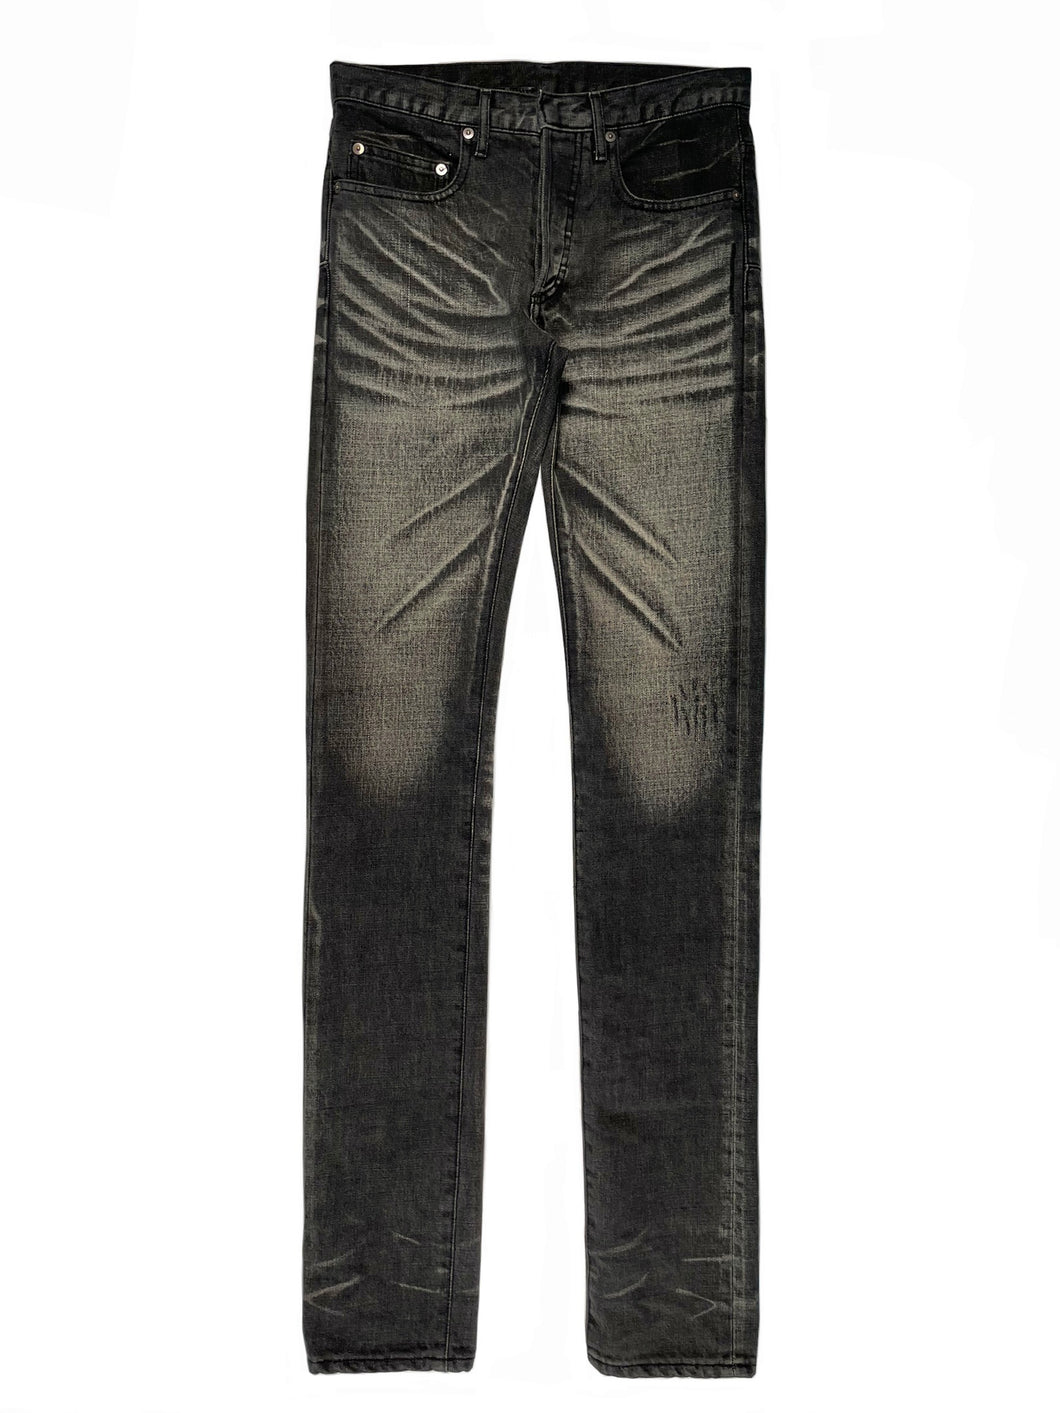 AW2003 Dior Homme Clawmark jeans